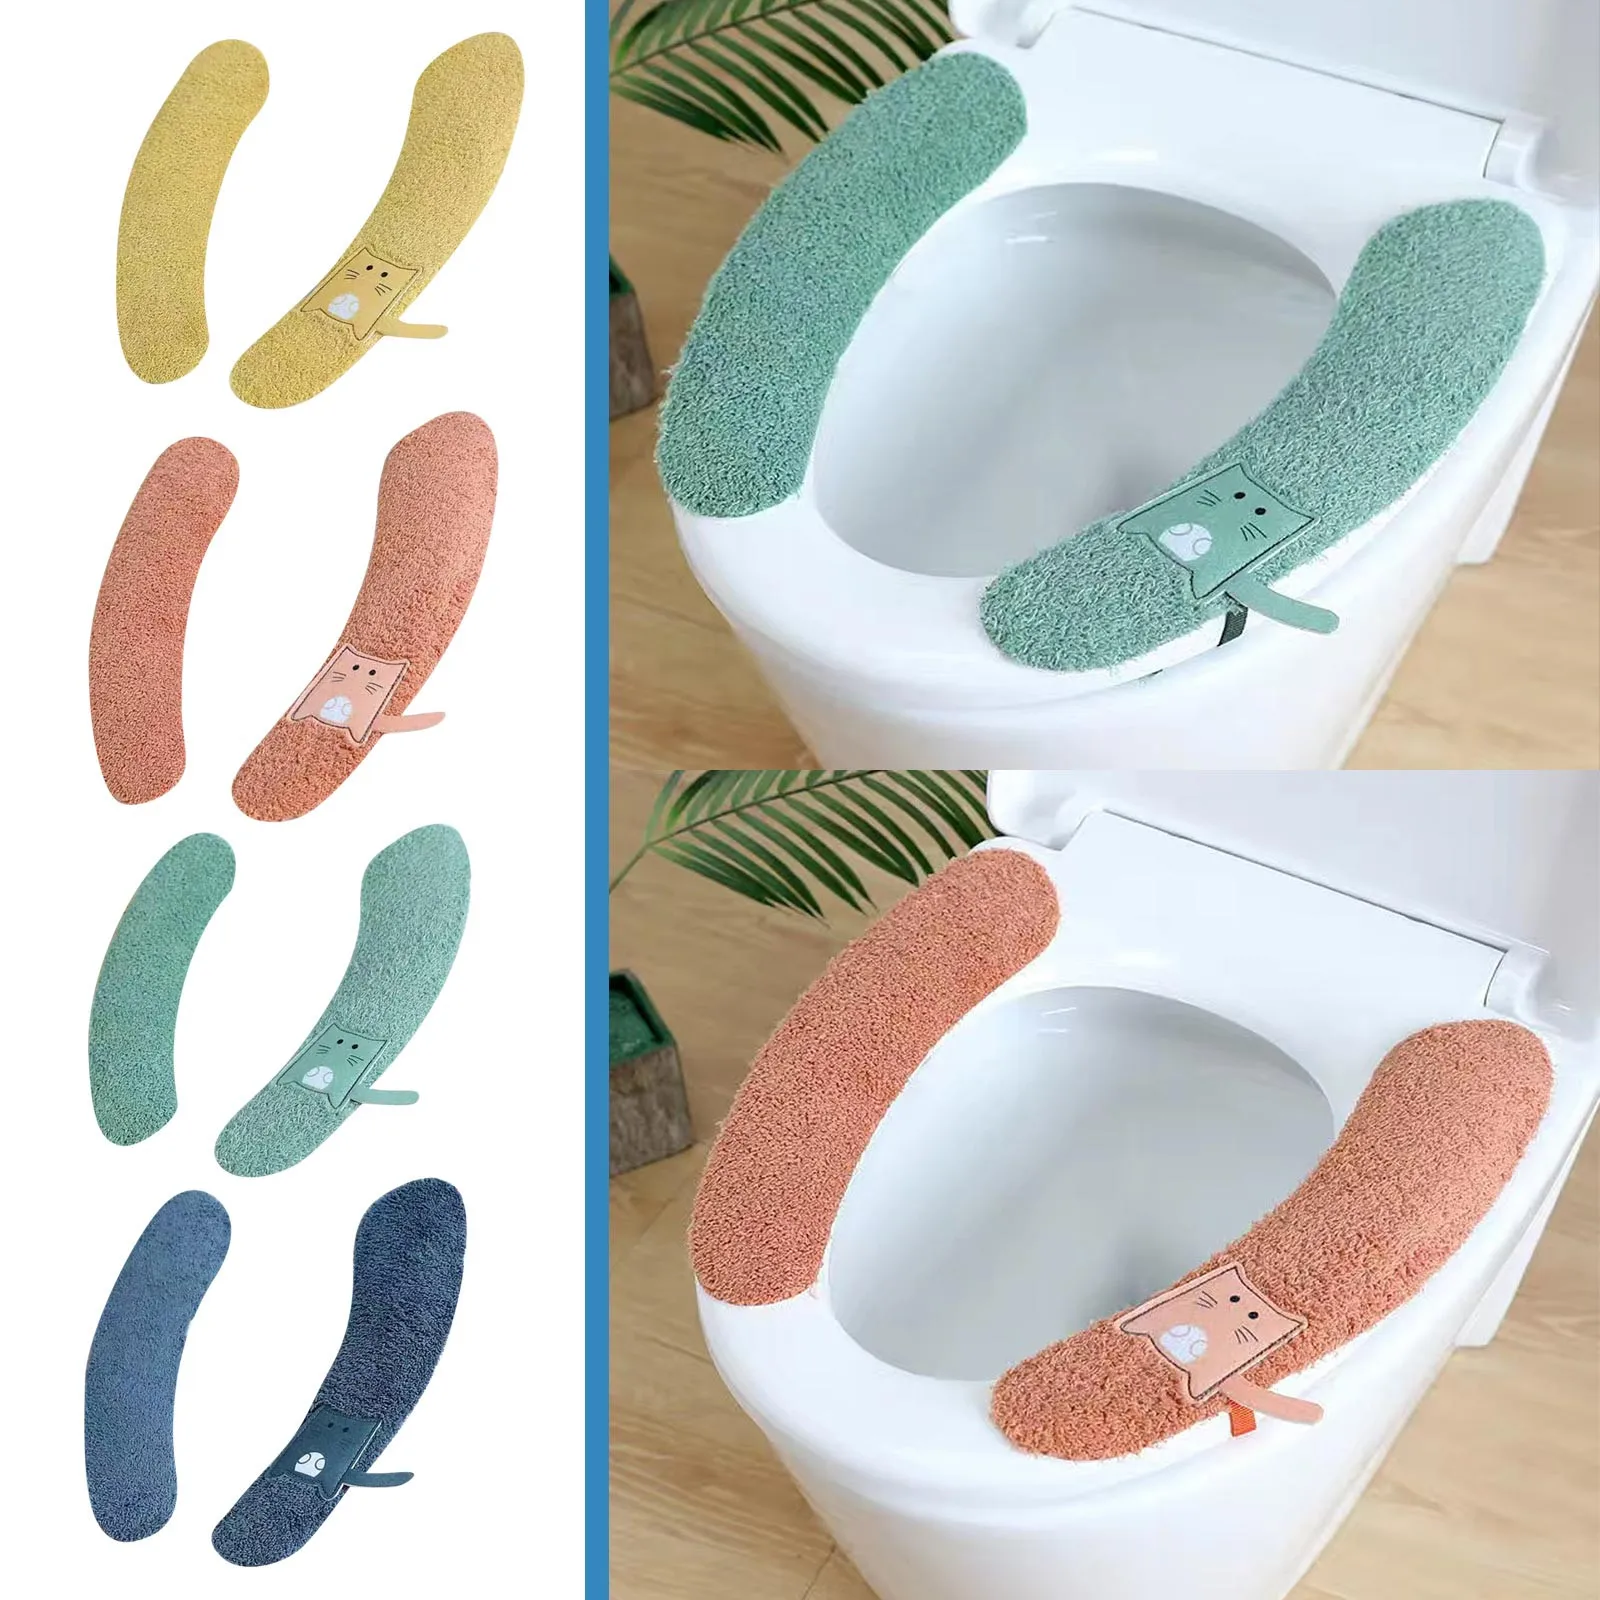 

Thicker Bathroom Toilet Seat Cover Pads Soft Warmer Toilet Seat Cushion Cover Stretchable Washable Fiber Cloth Easy Bath Rugs